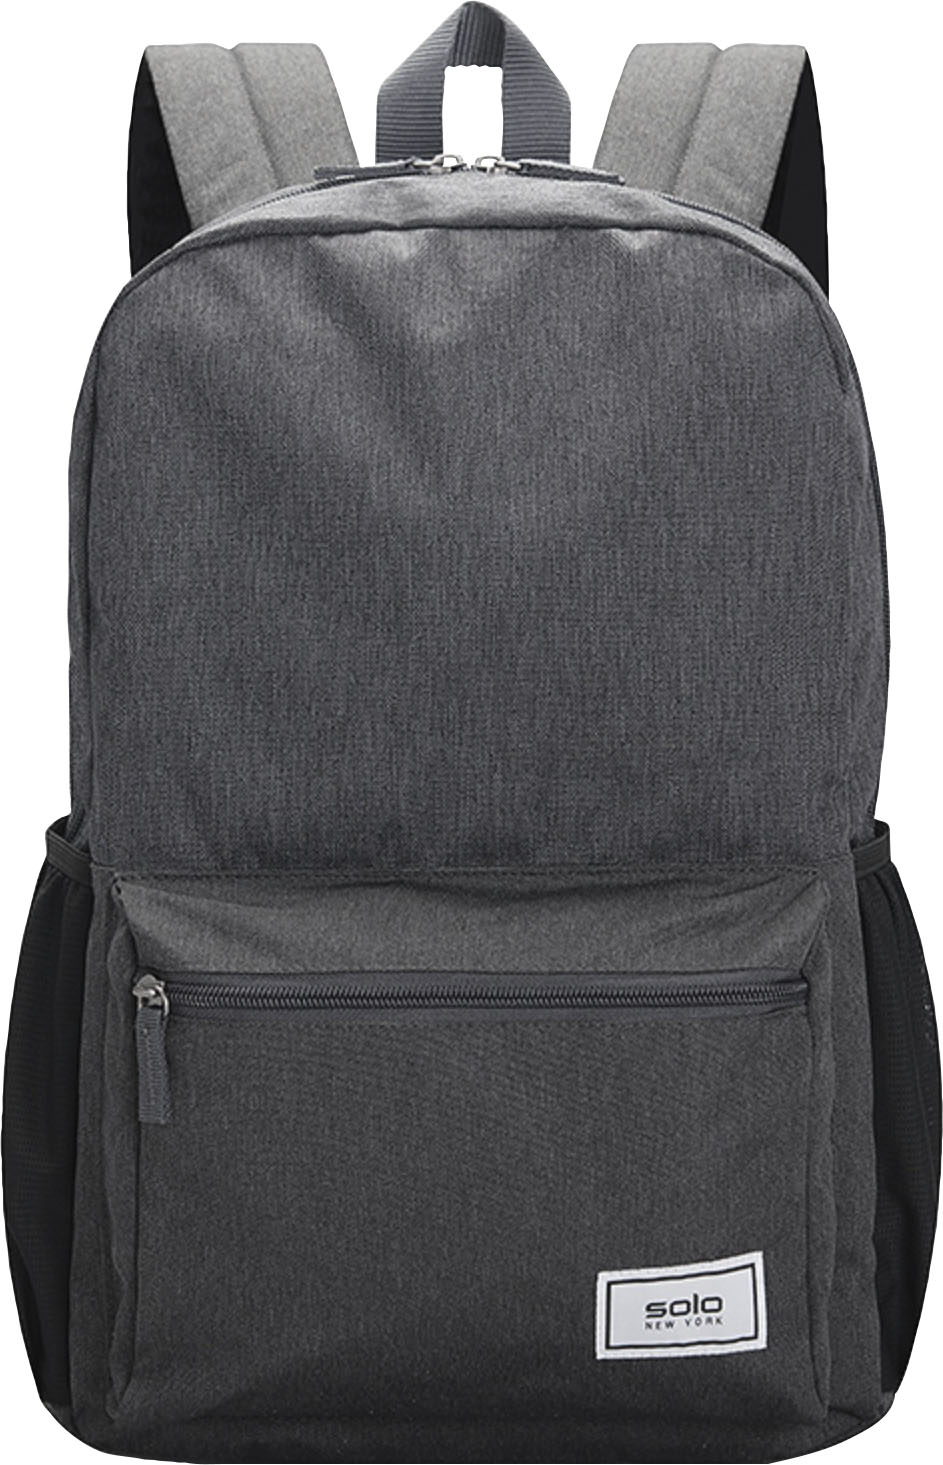 Solo New York Re:Solve Recycled Backpack (Black or Navy) $15.99 + Free Store Pickup @ Best Buy